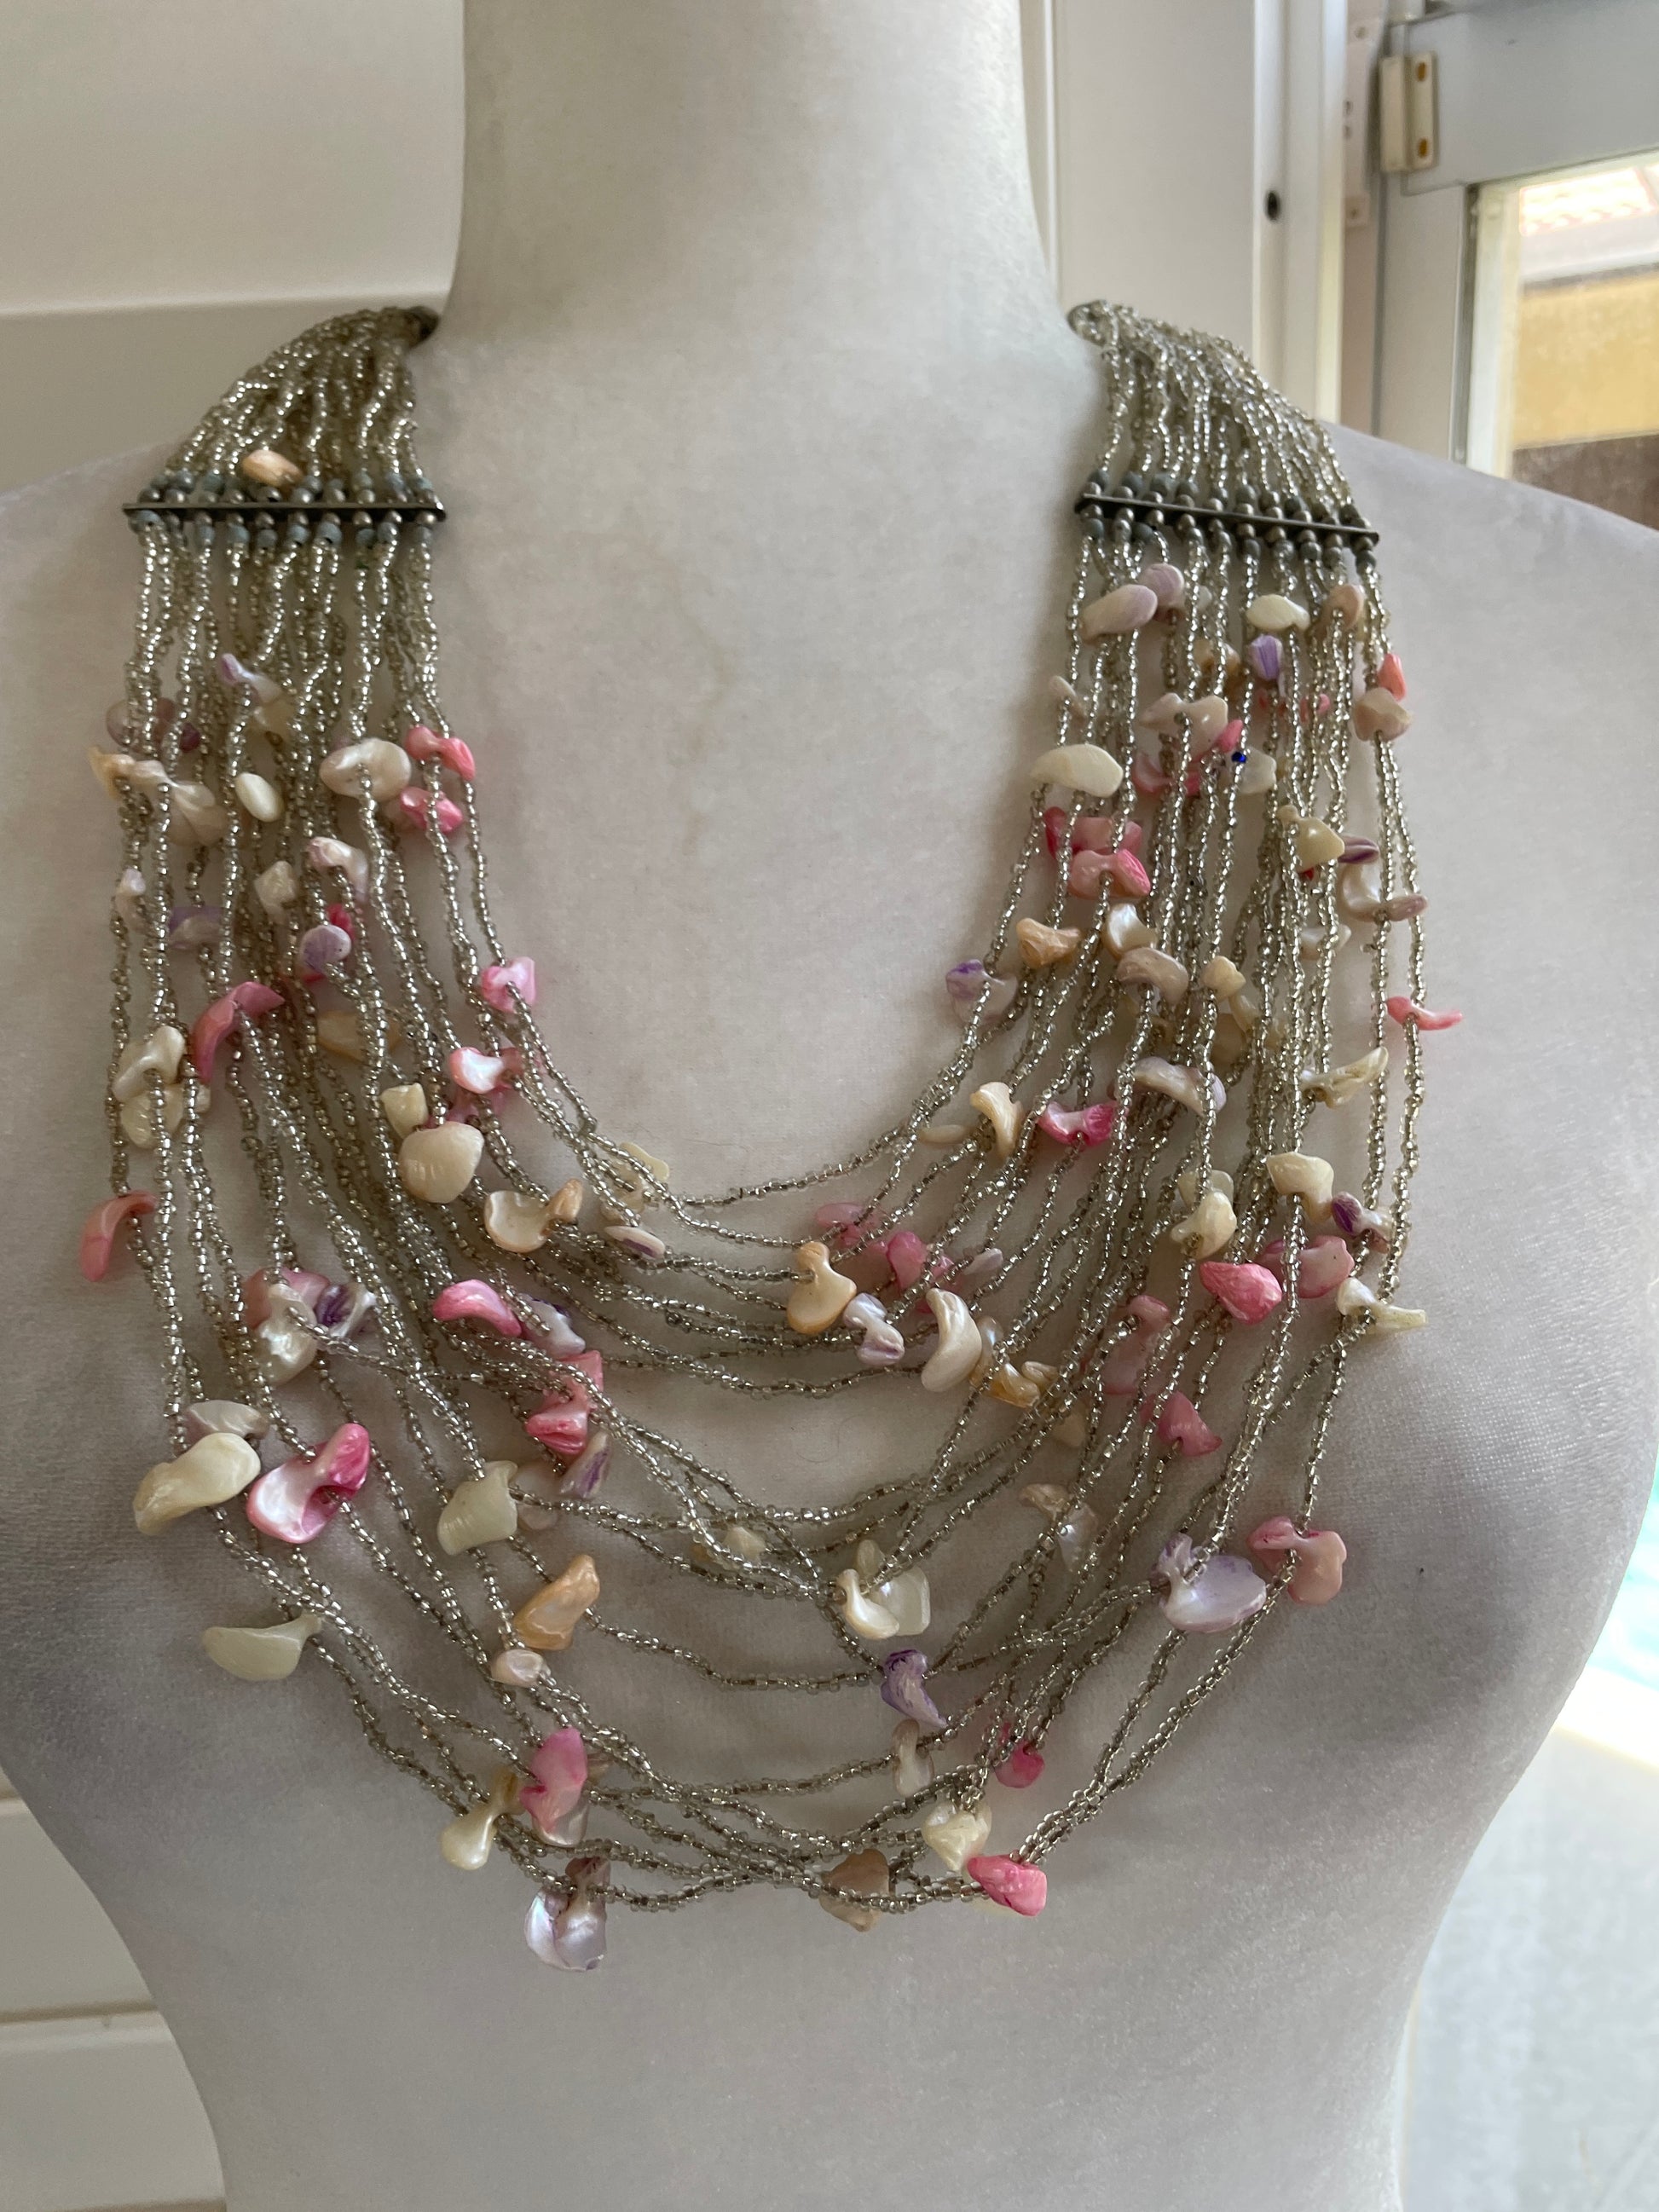  Hand Crafted 2000s Beads & Shells Draped Bib Statement Necklace